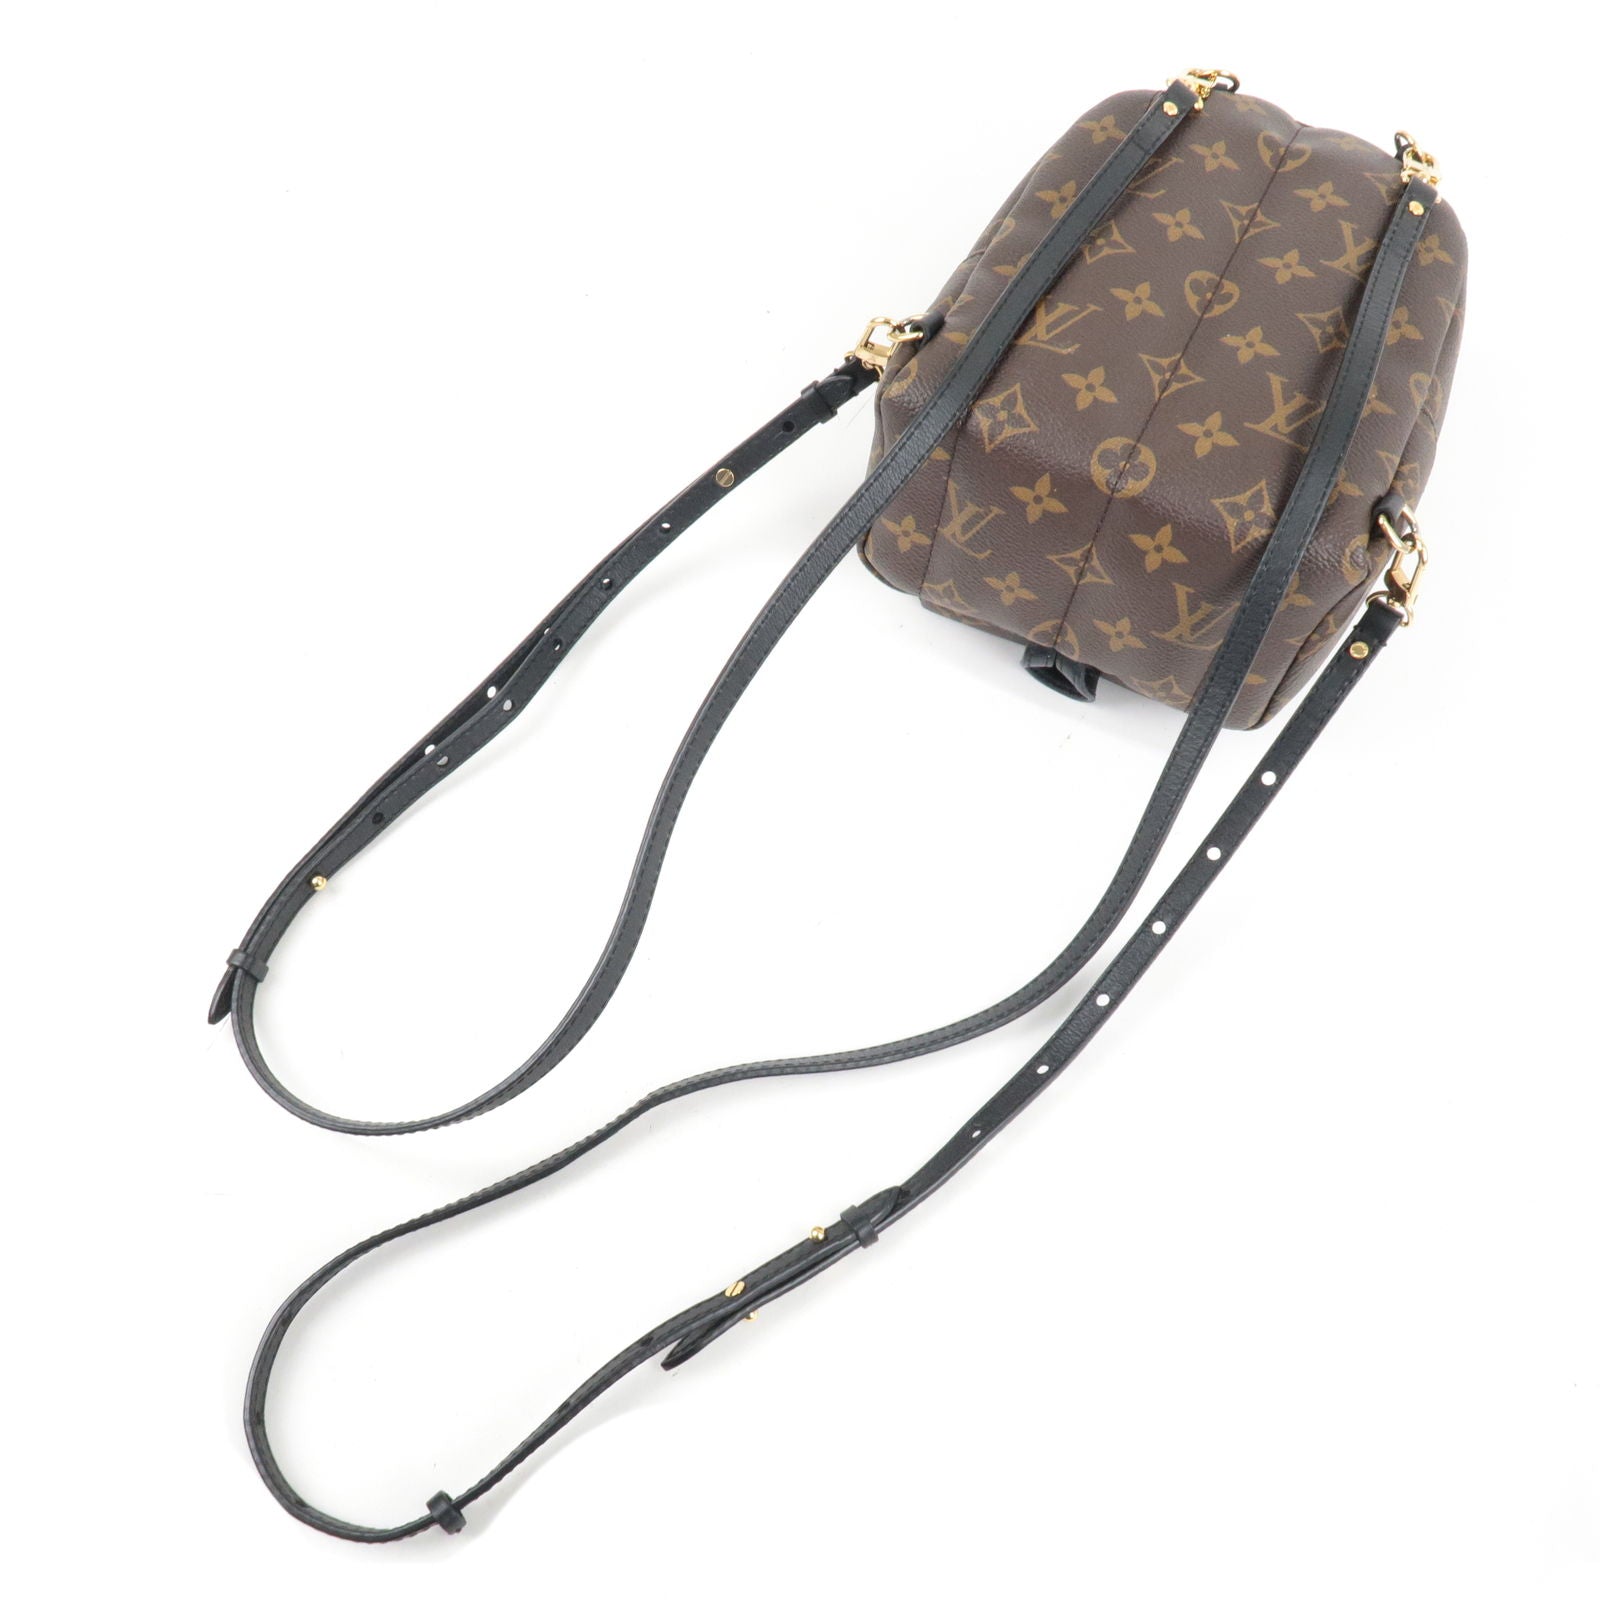 LV Metis Pochette - Leather Strap ( Convert to Backpack Style )